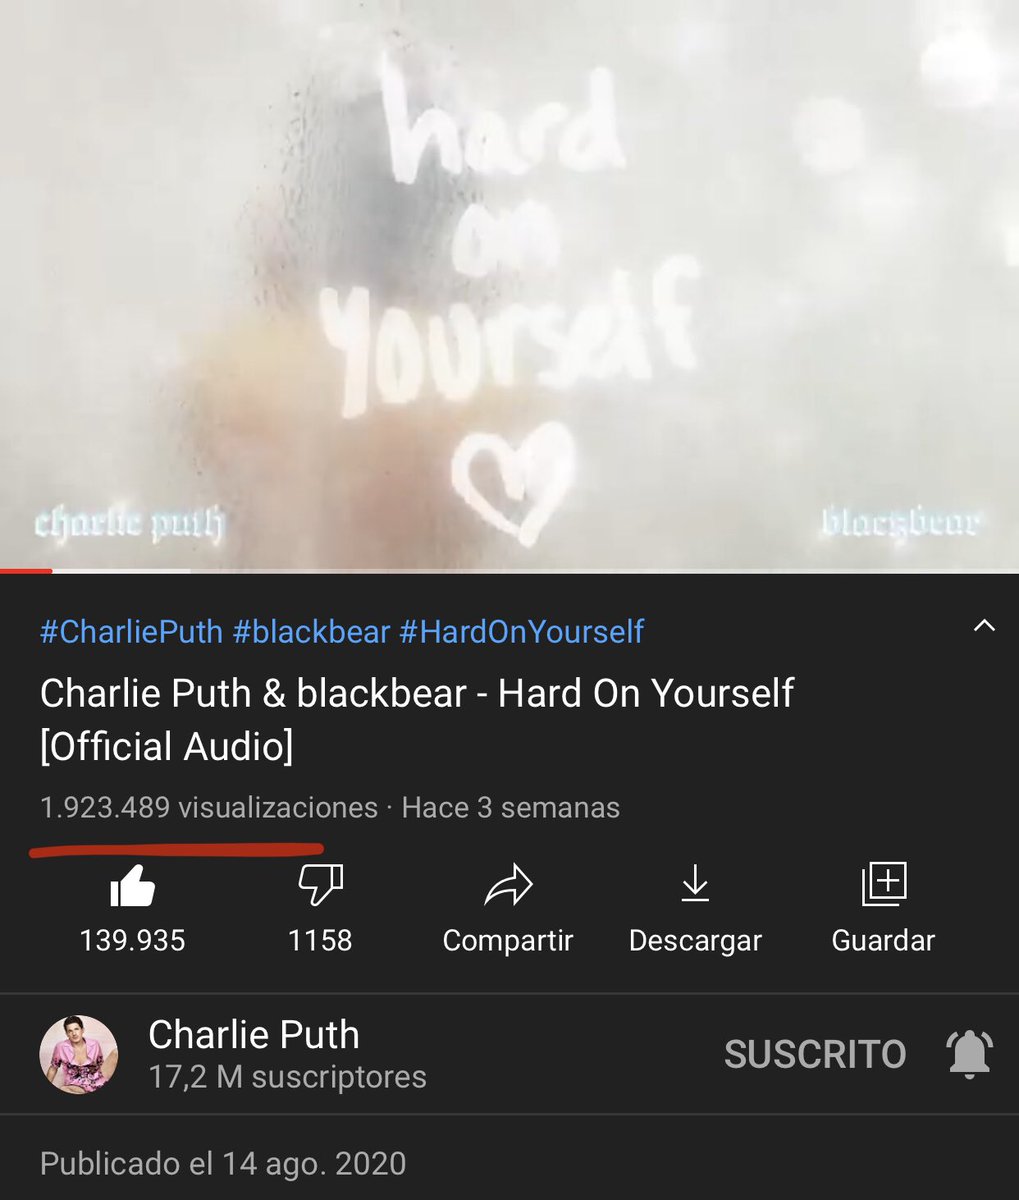 Let’s go family!!! #Girlfriend is near the 10M and #HardOnYourself of the 2M on YouTube!!! This is so great!!! Congratsssss Charlie!!!!
@charlieputh #charlieputh